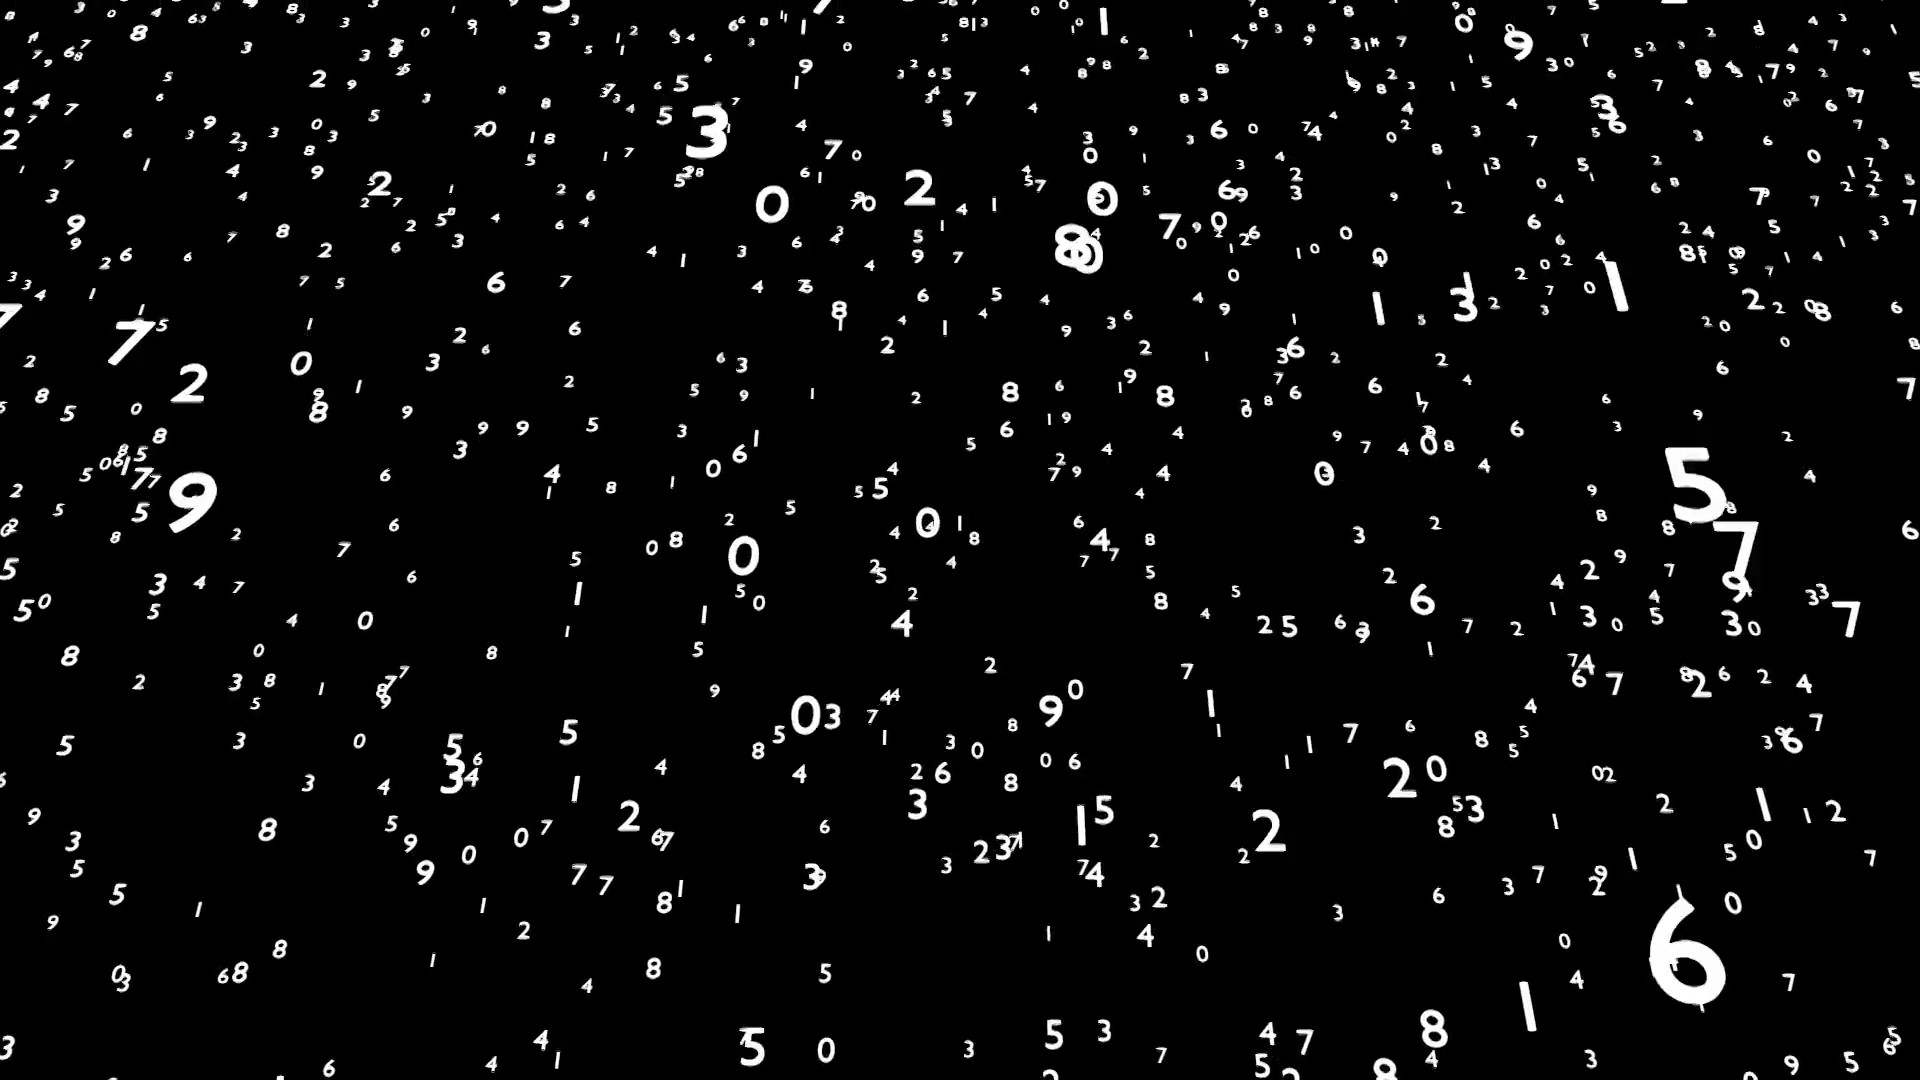 1920x1080 Animated falling white color numbers from 0 to 9 on black background.  Motion Background - VideoBlocks